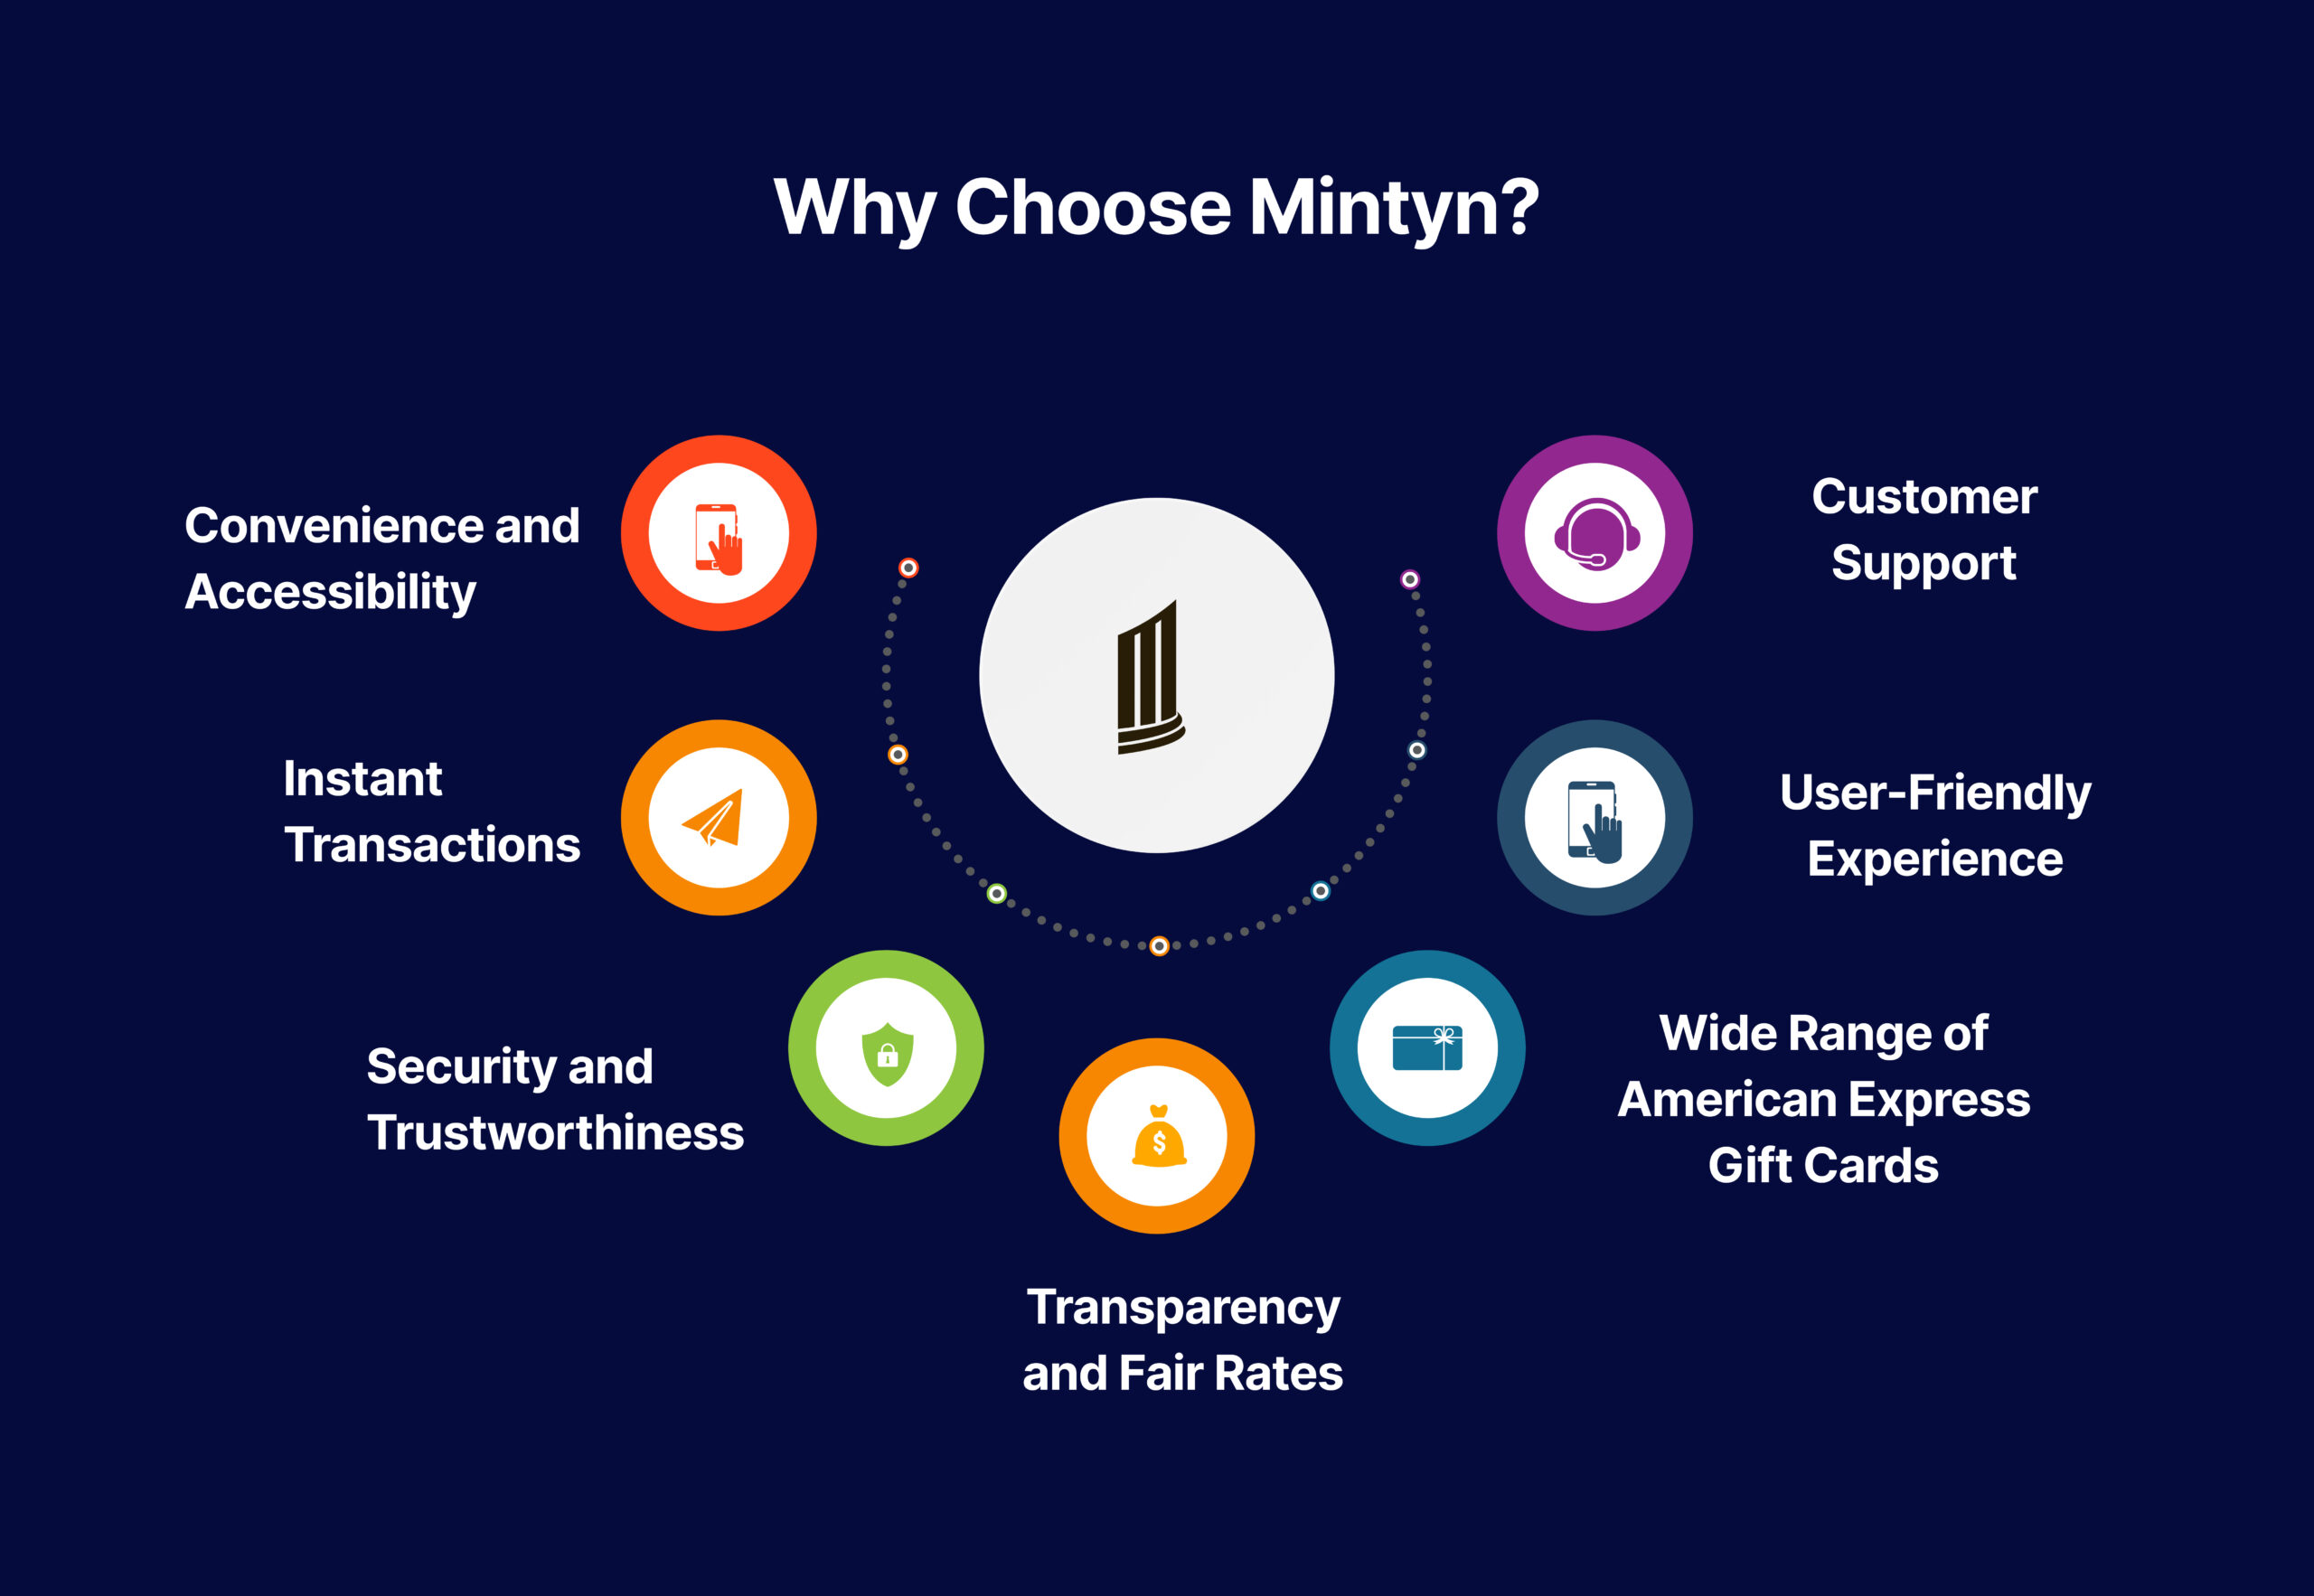 Benefits of trading Amex Gift cards with Mintyn